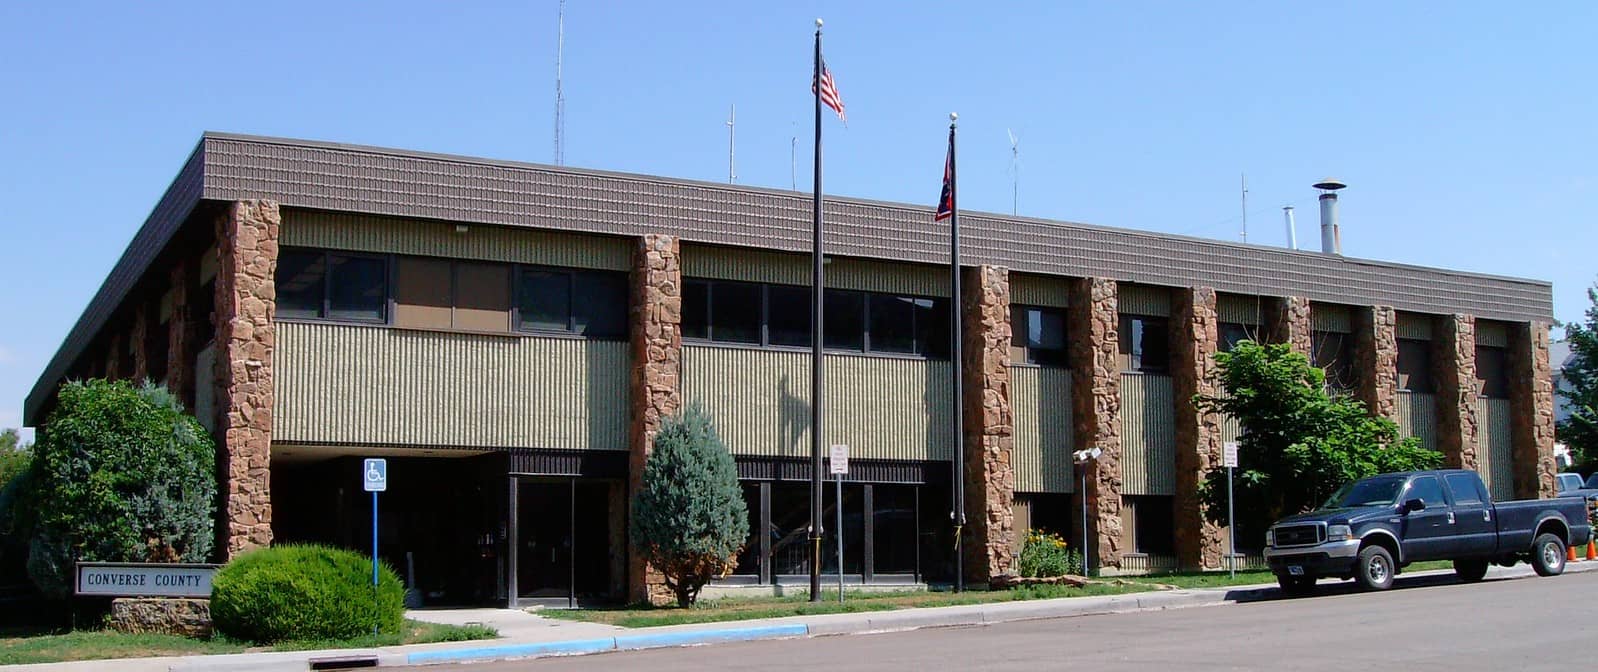 Image of Converse County District Court